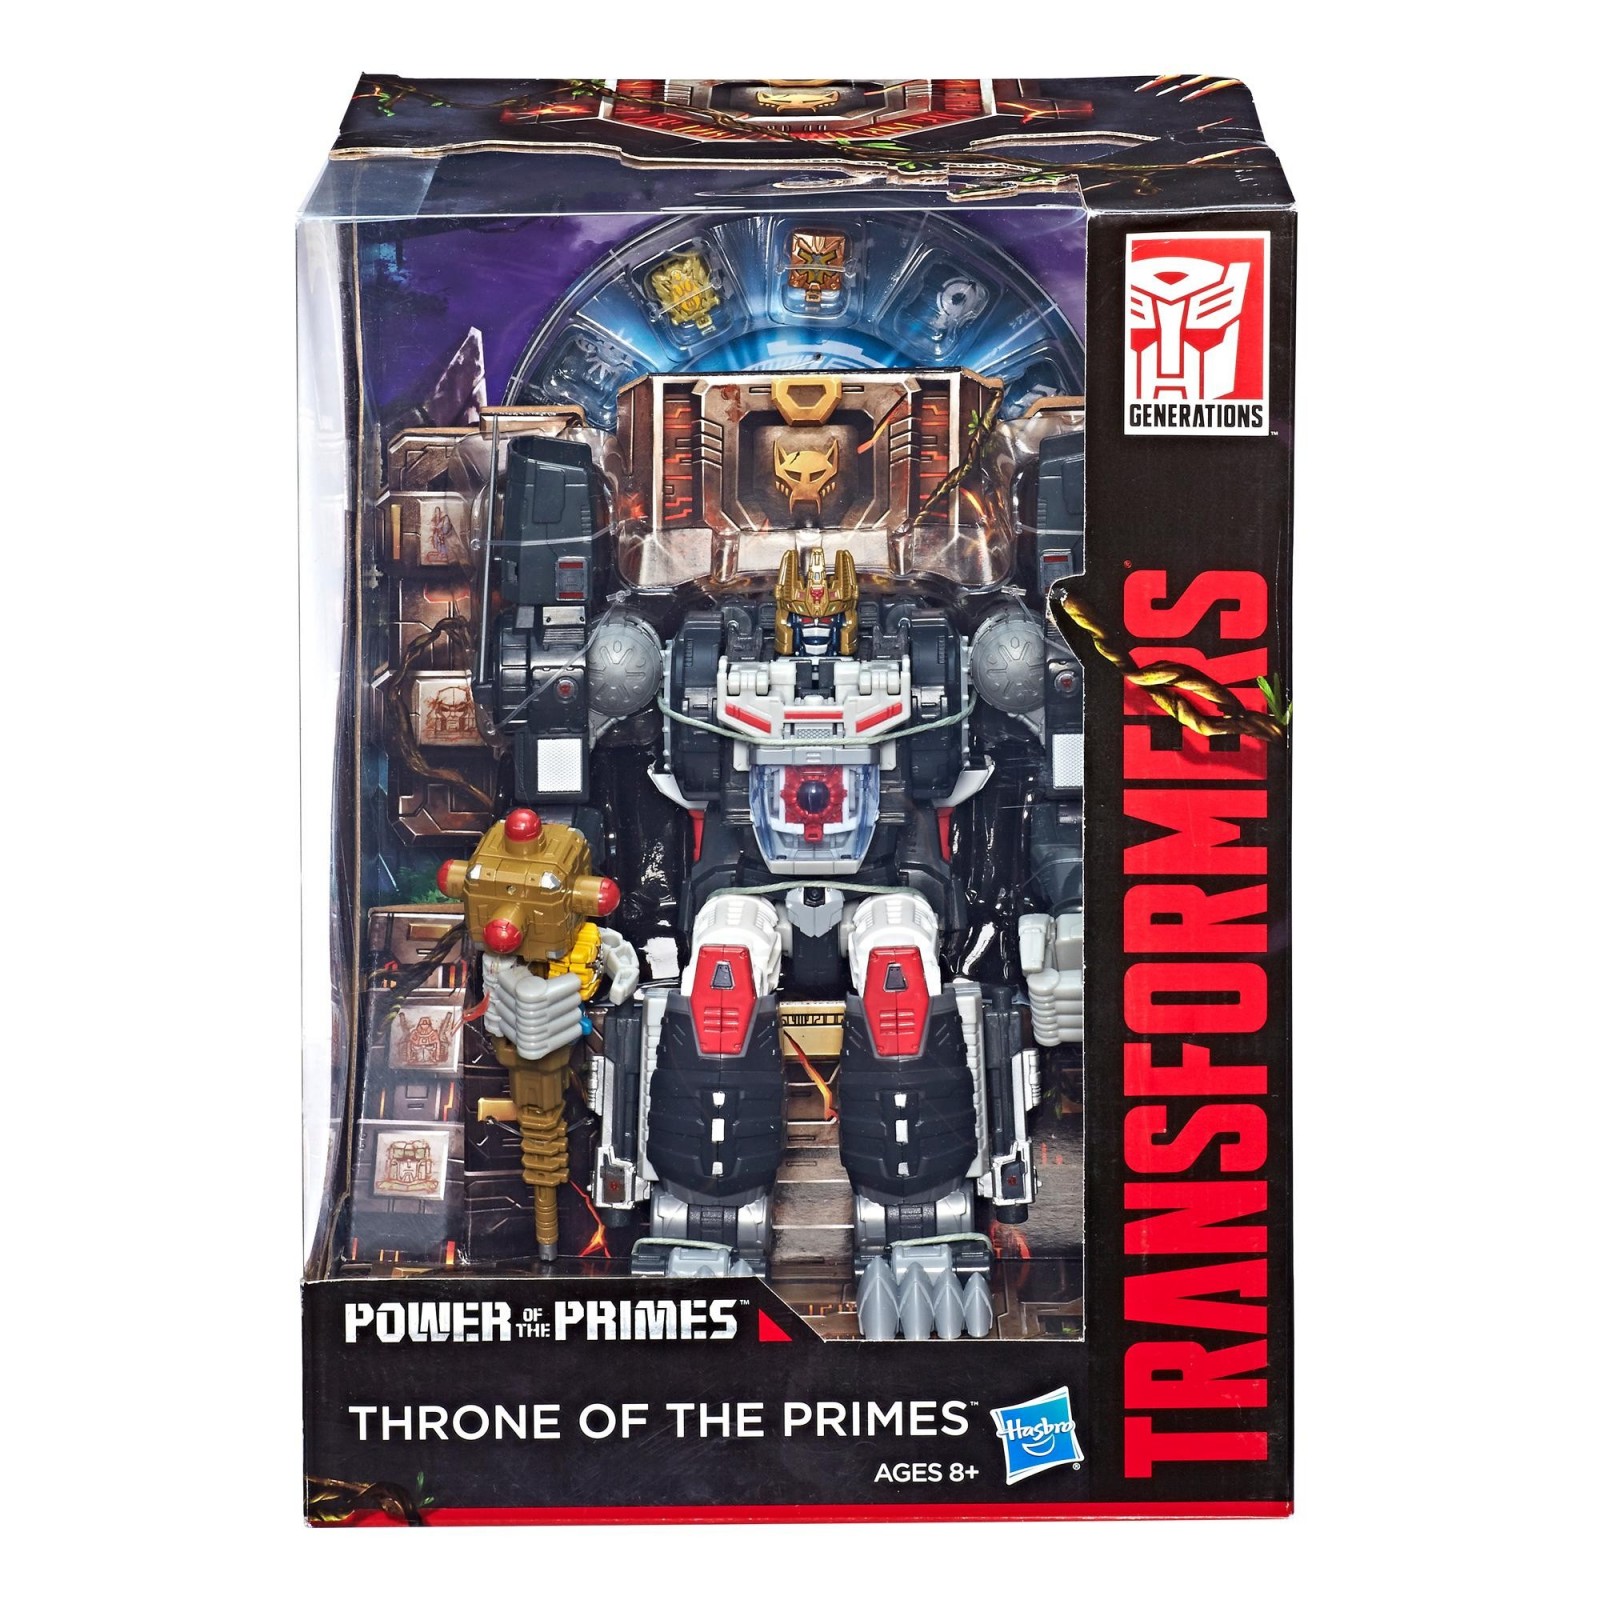 Transformers News: Price and Order Date Revealed for Transformers Power of the Primes Throne of the Primes